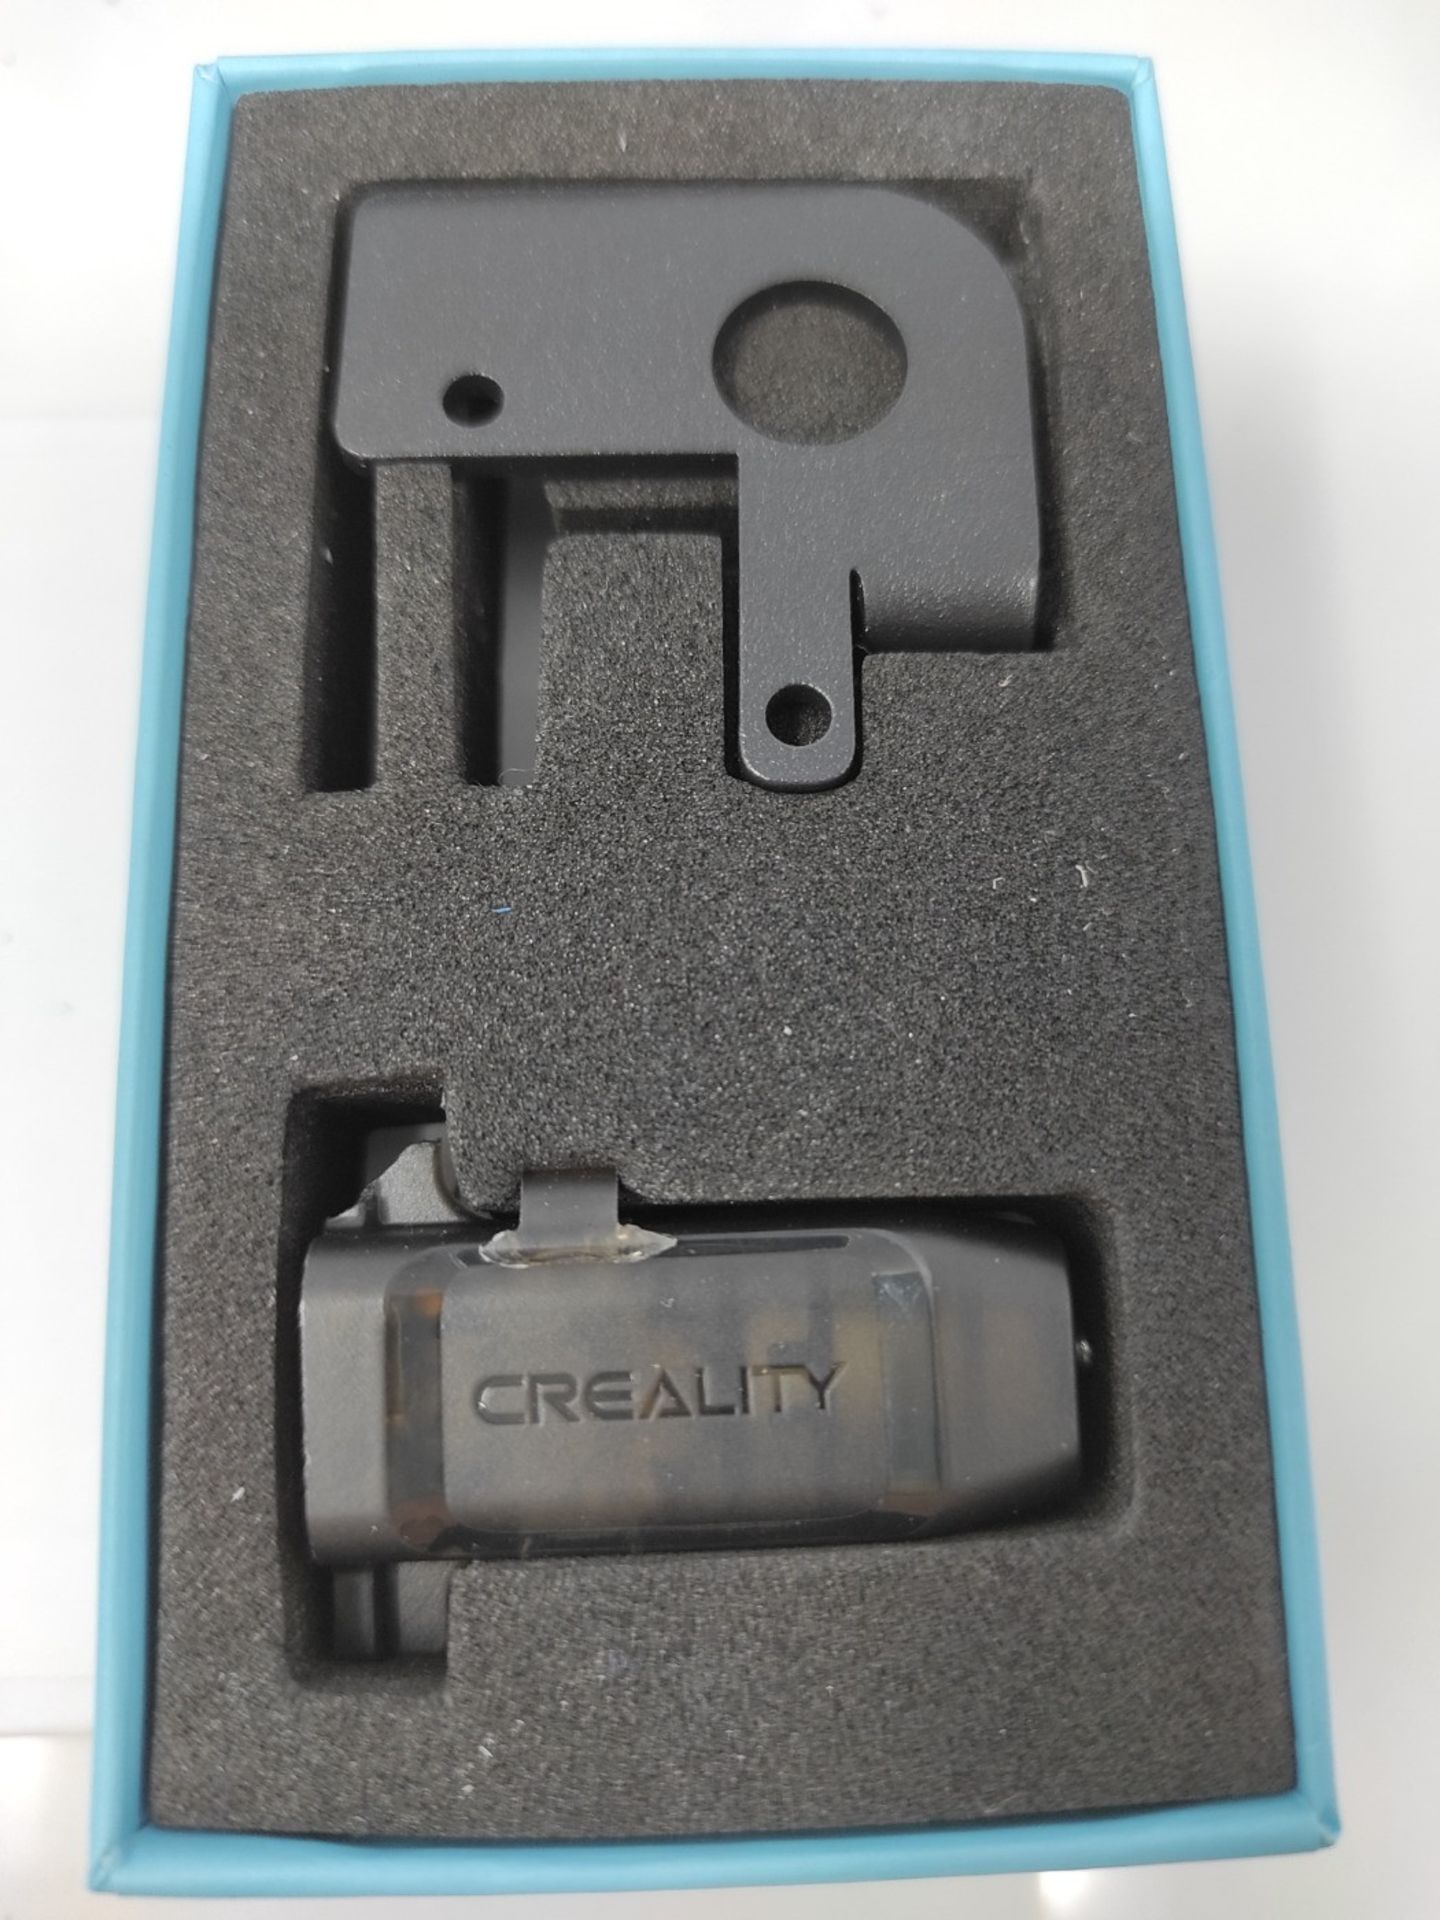 Creality Original Upgrade CR Touch kit 3D Printer Auto Bed Leveling Sensor Compatible - Image 2 of 2